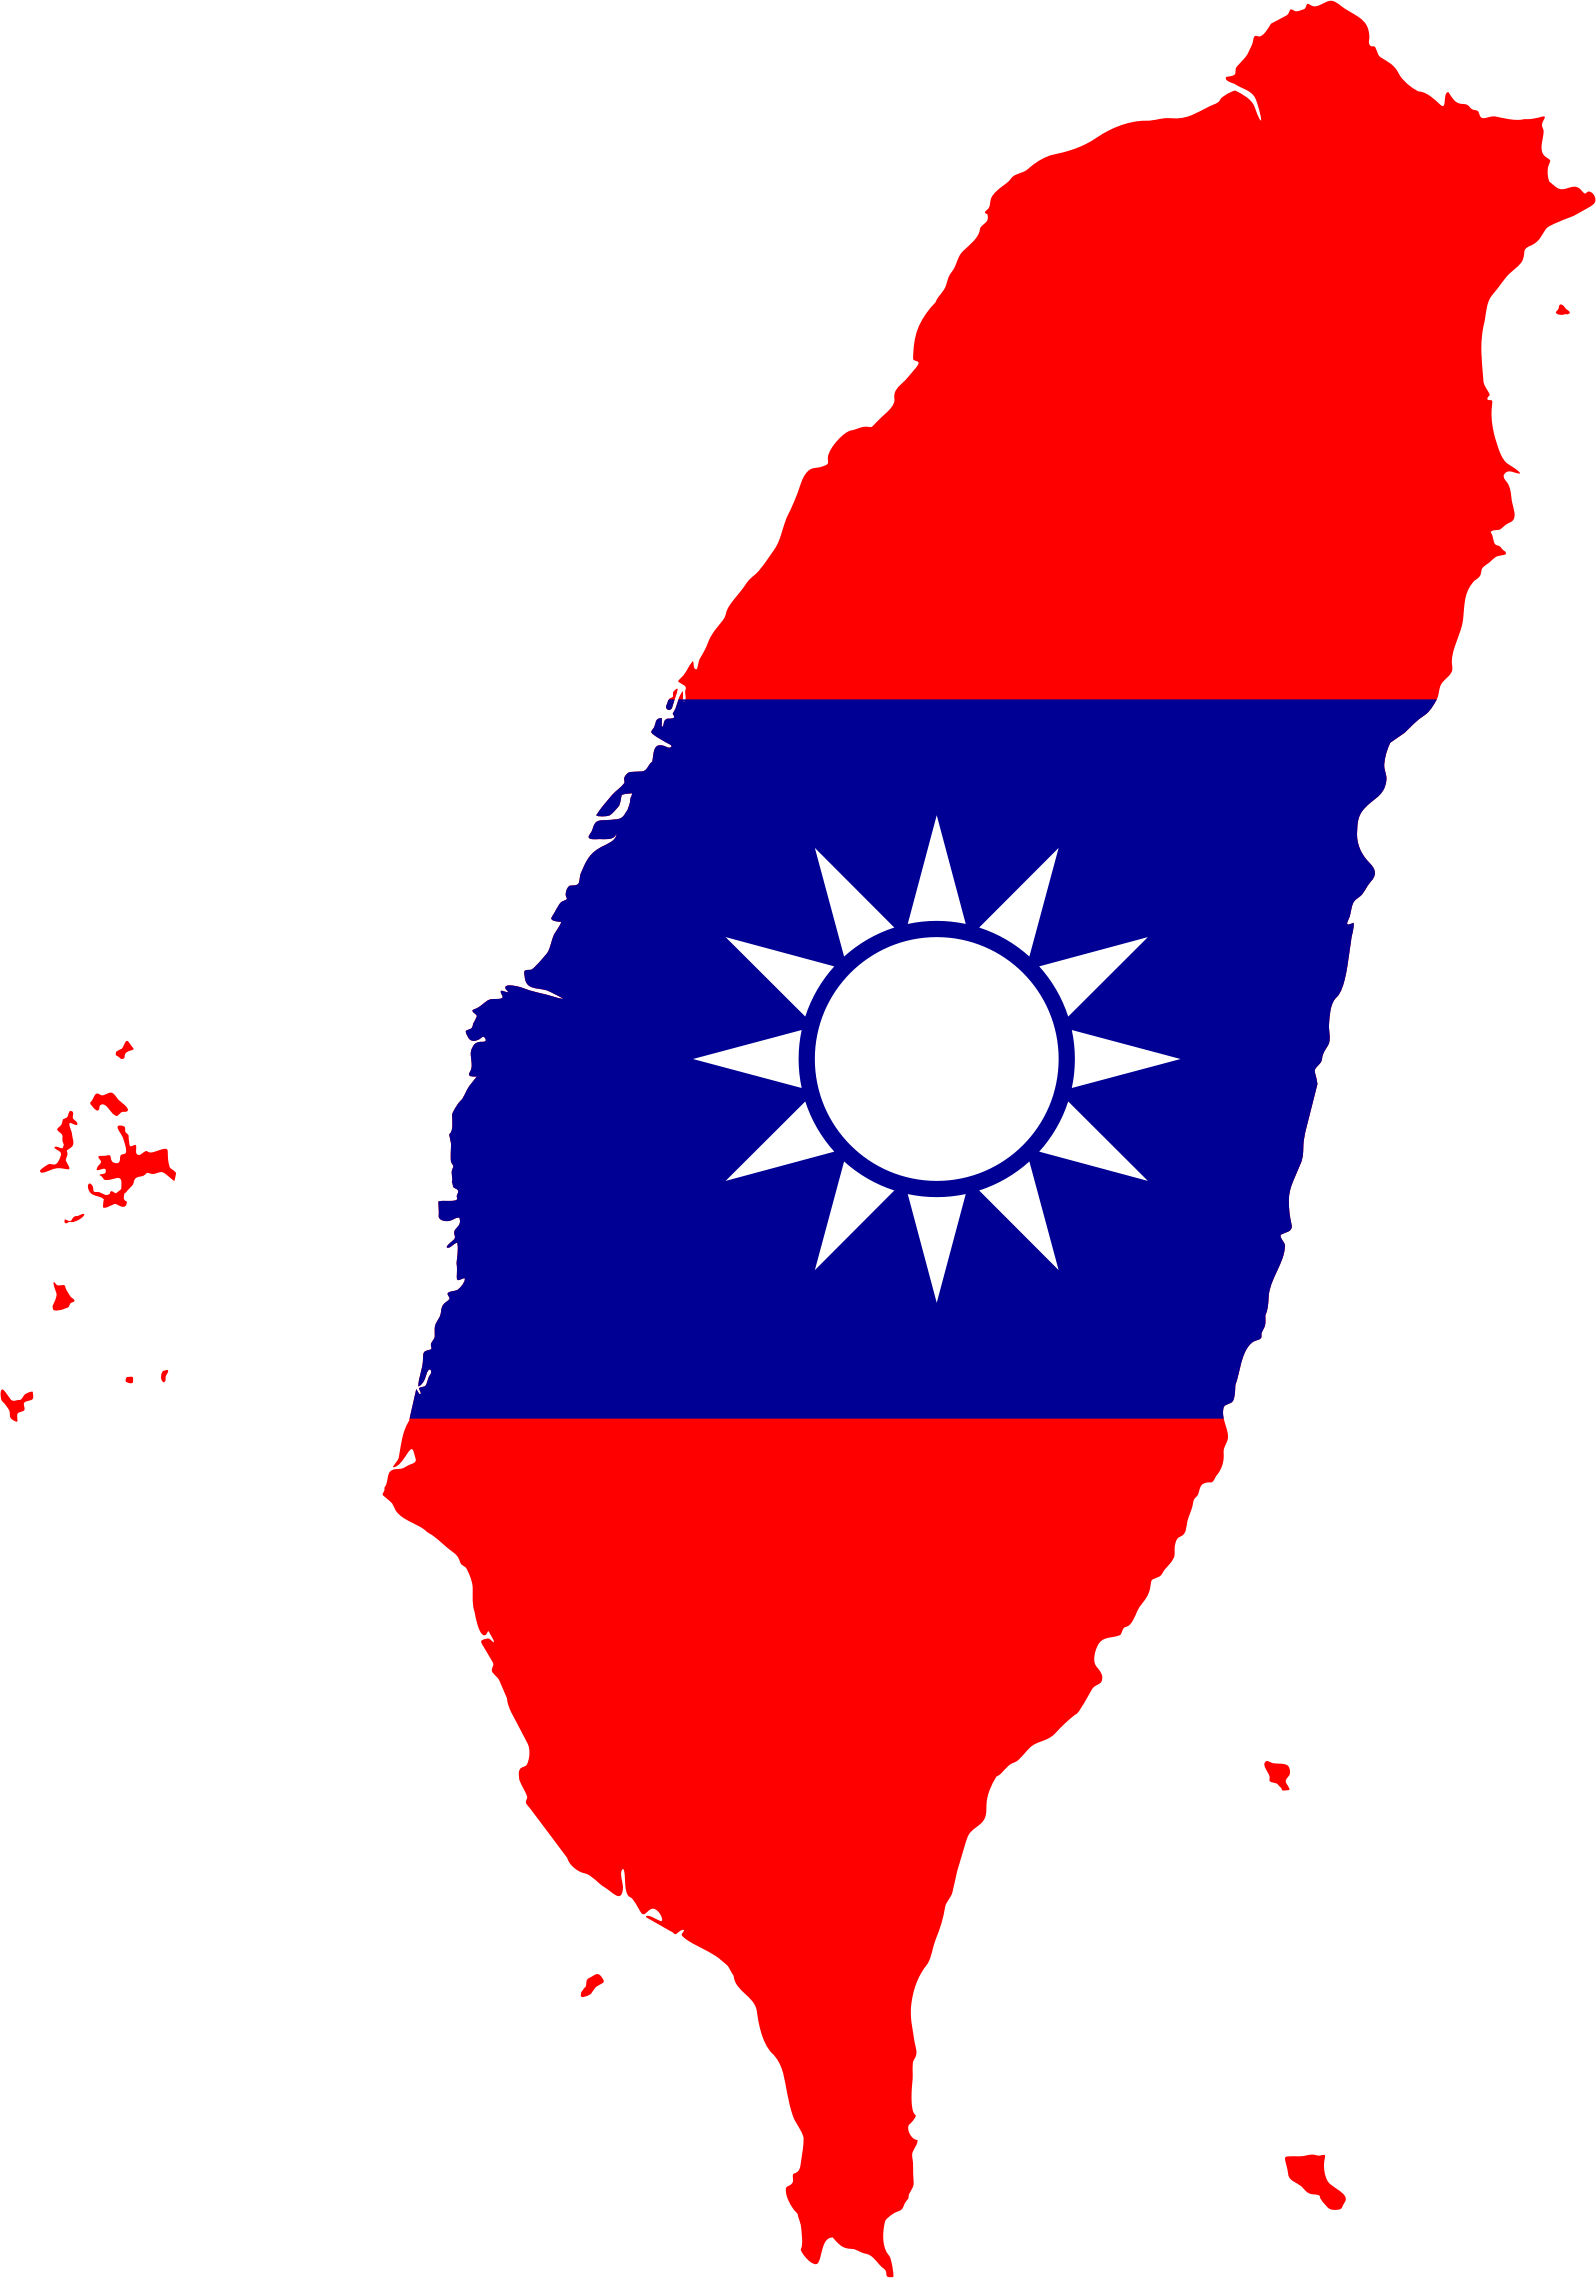 File:Flag-map-of-taiwan.png